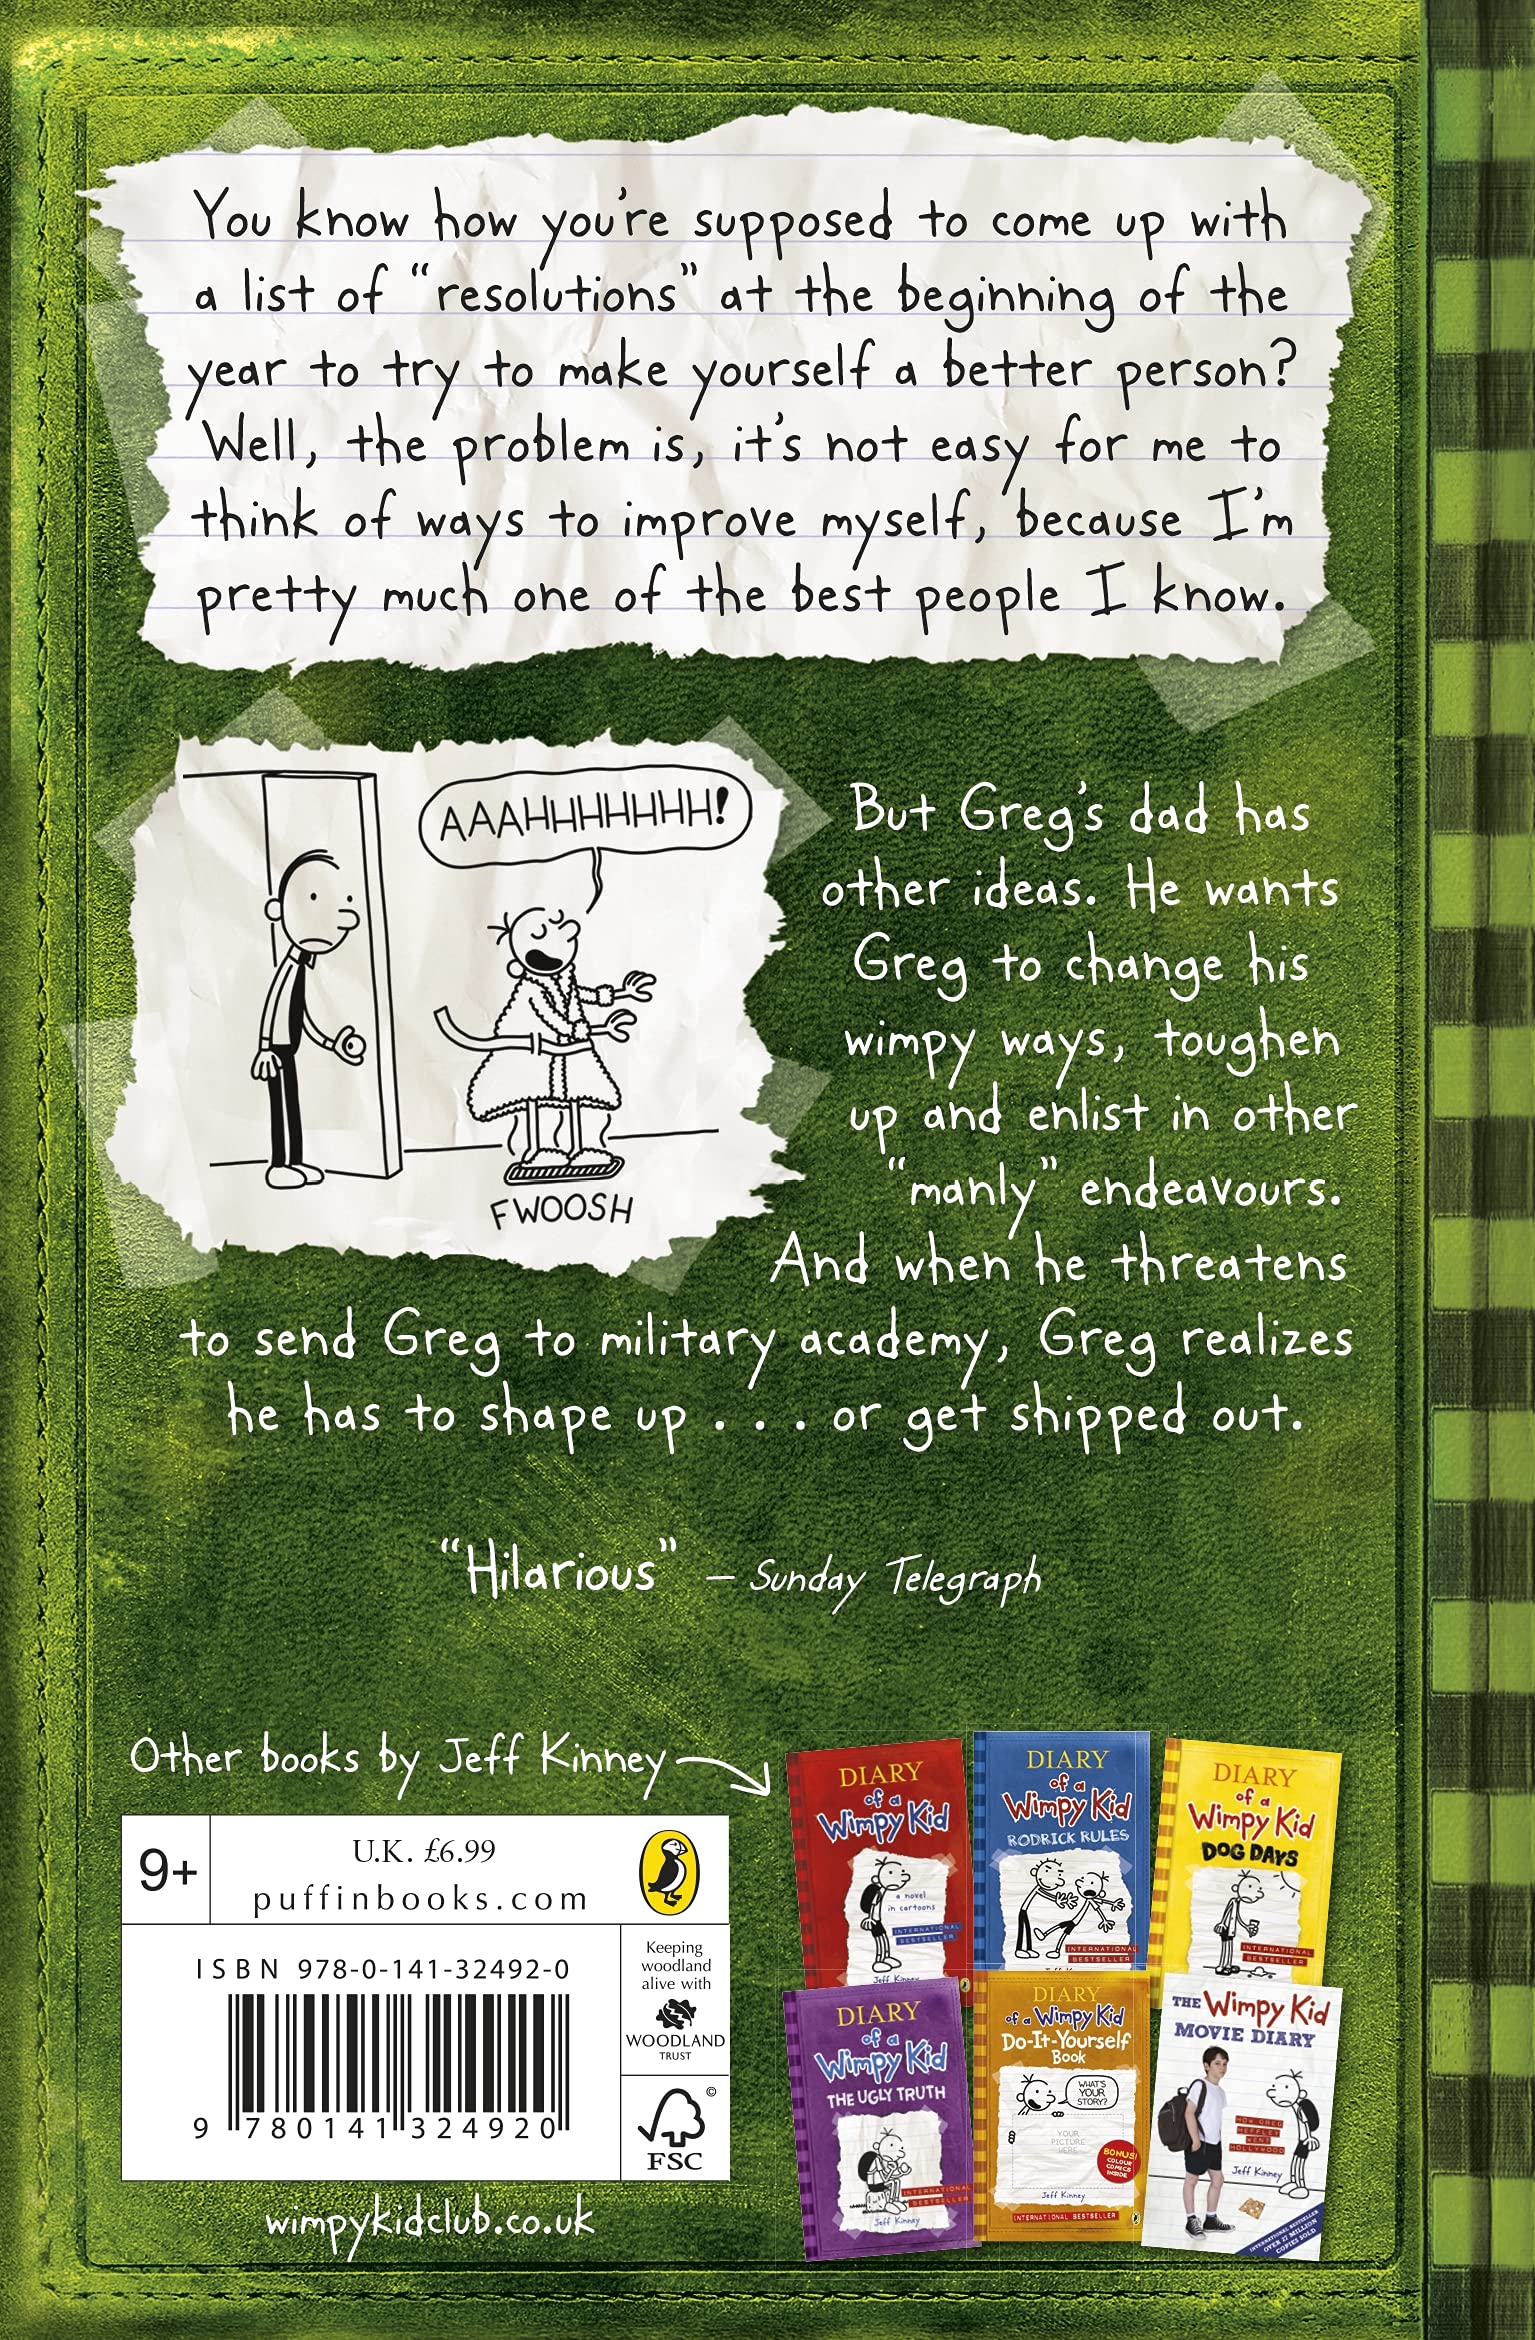 Diary of a Wimpy Kid (3) : The Last Straw